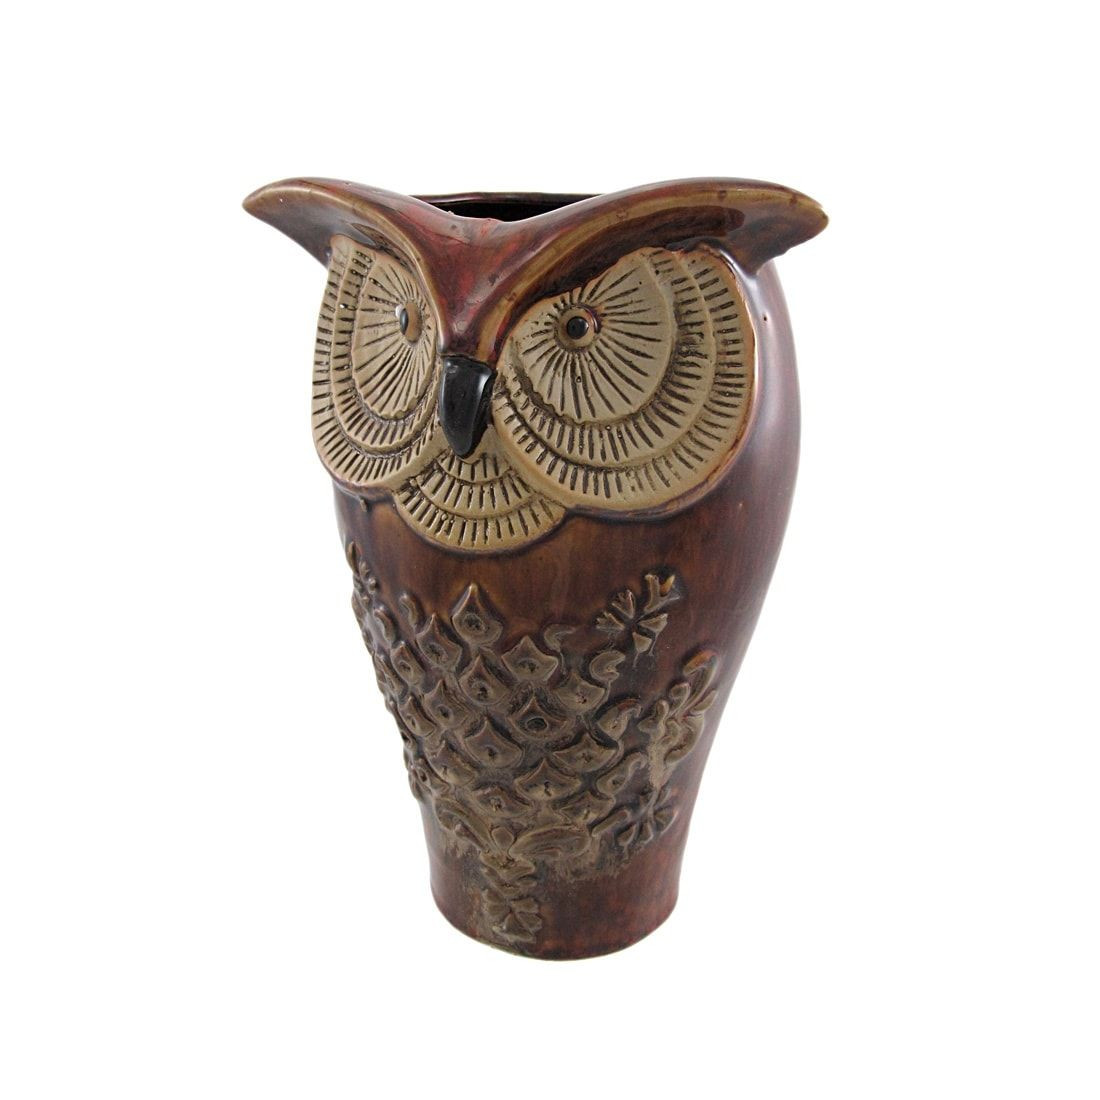 13 Stylish 16 Inch Square Vase 2024 free download 16 inch square vase of 9 inch tall ceramic owl flower vase brown flower vases outlet in 9 inch tall ceramic owl flower vase brown flower vases outlet store and products